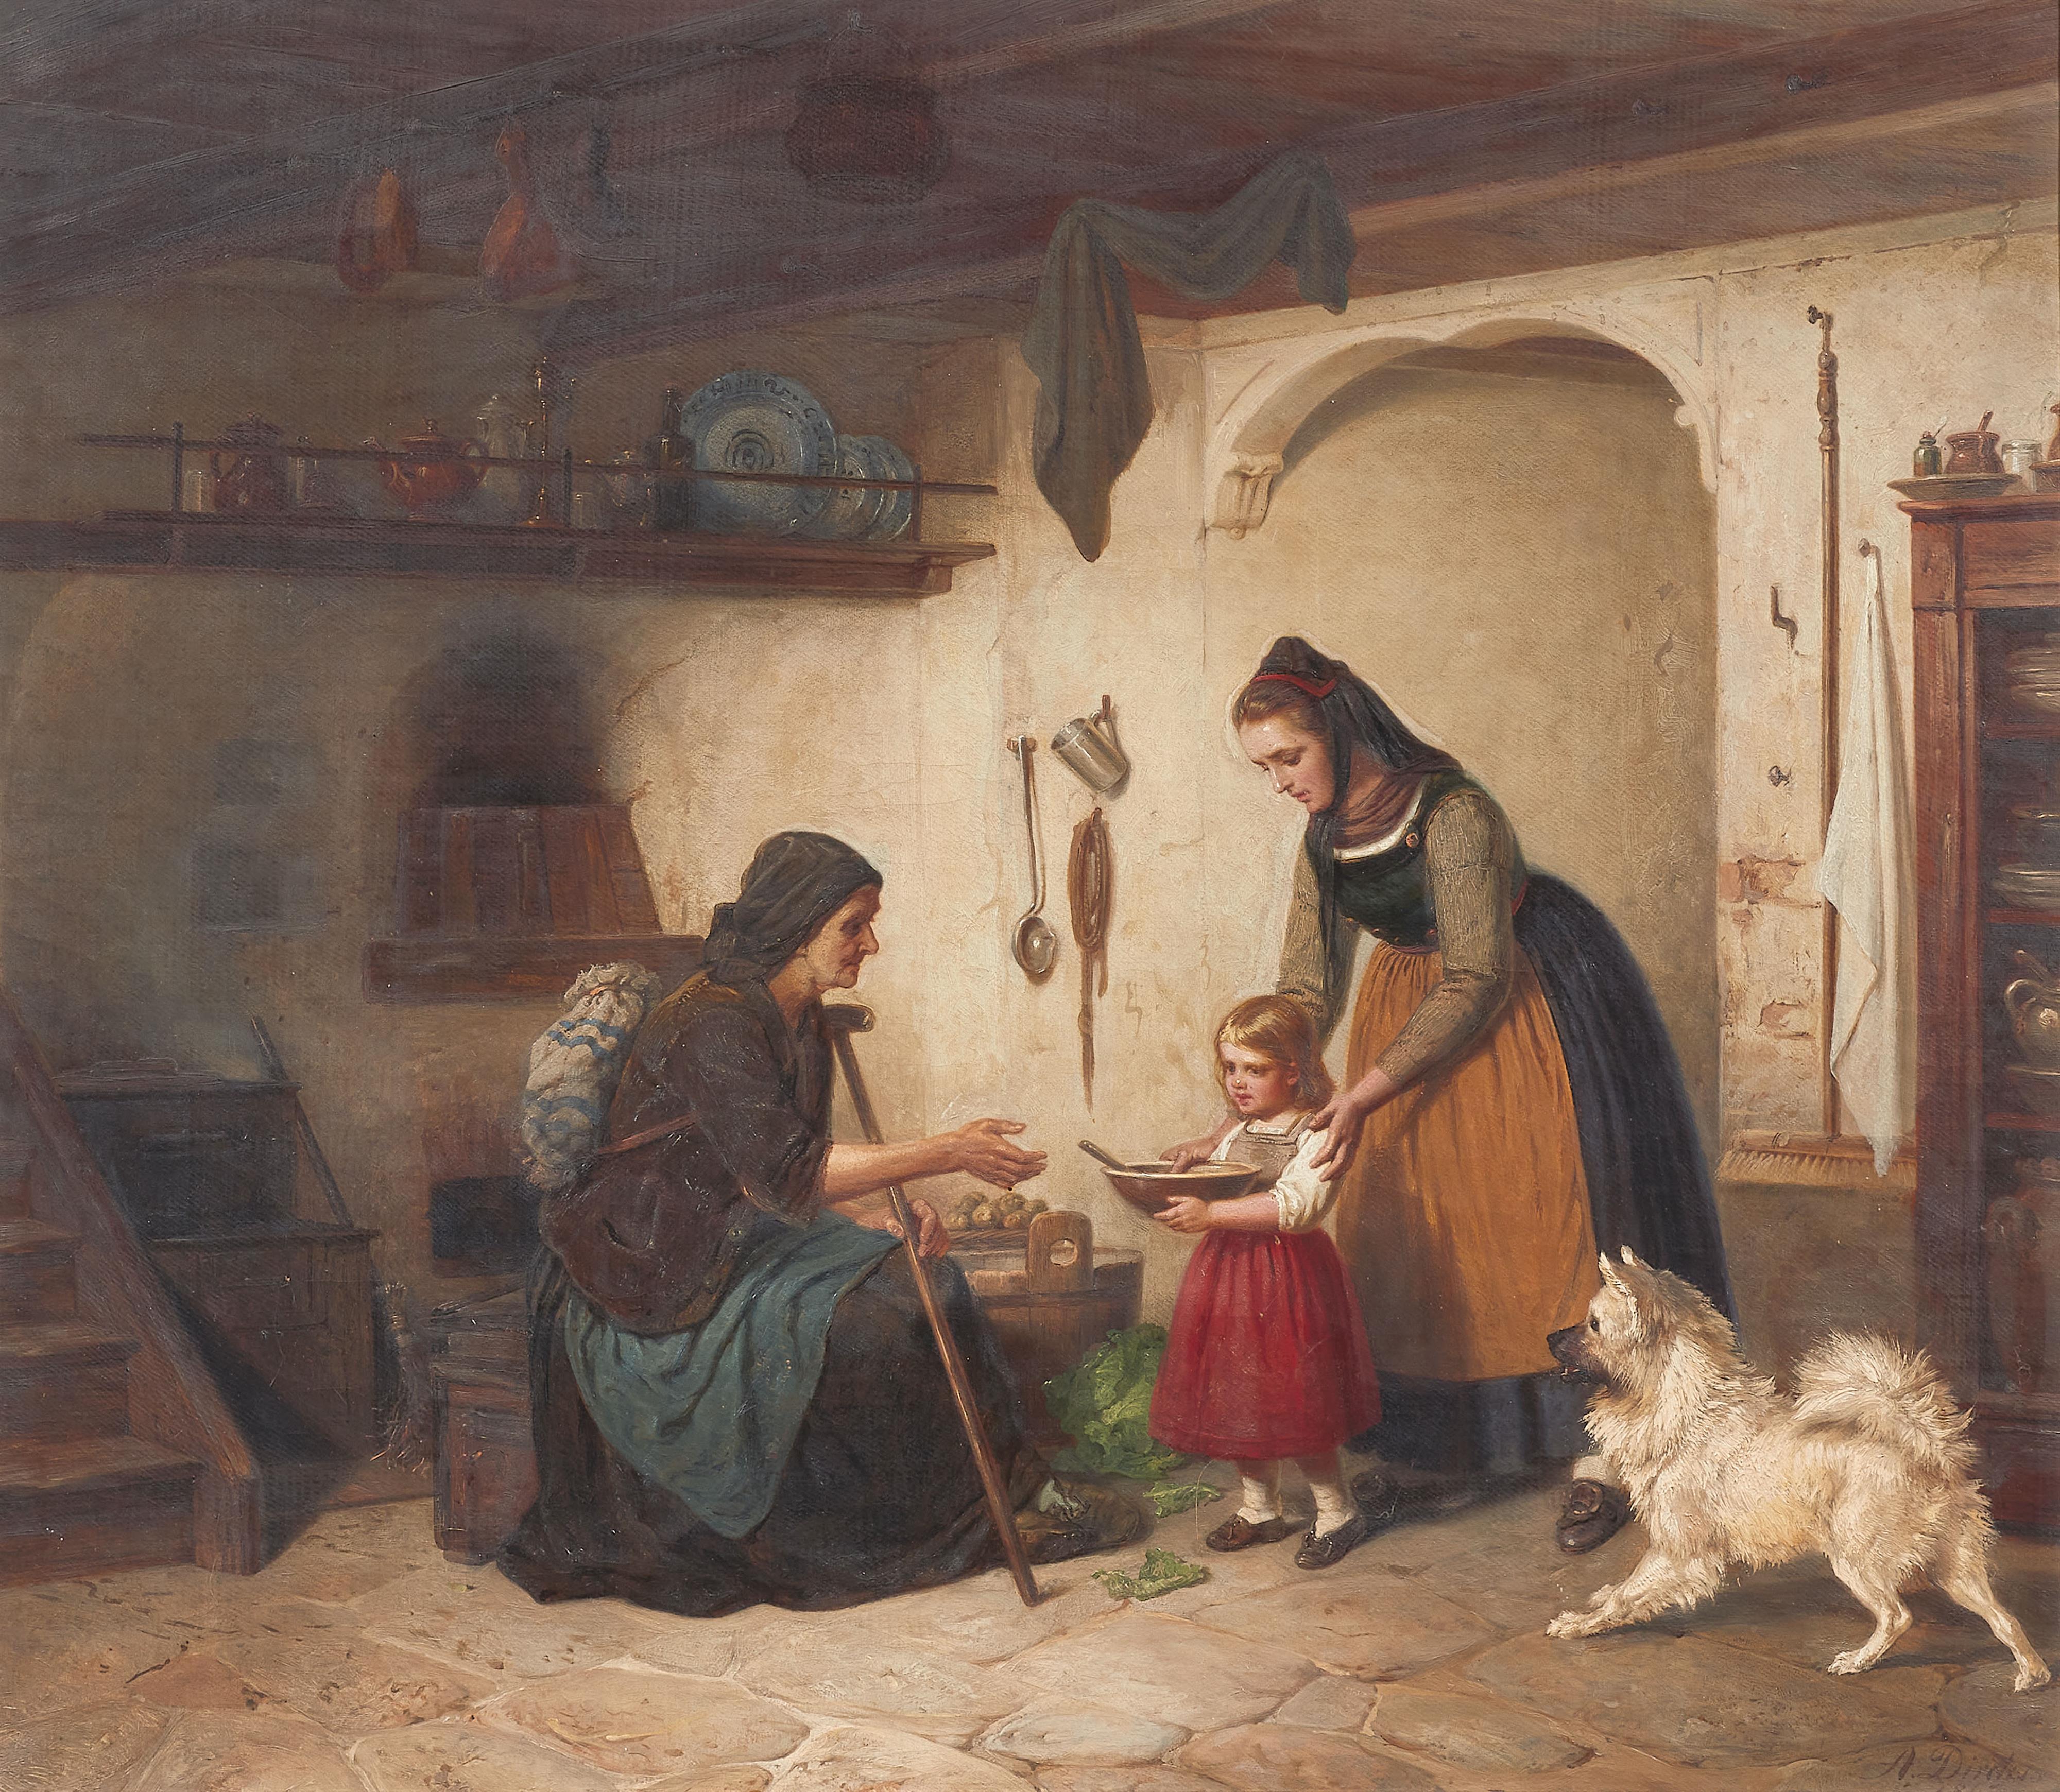 August Diercks - Interior Scene with a Peasant Family and a Dog - image-1